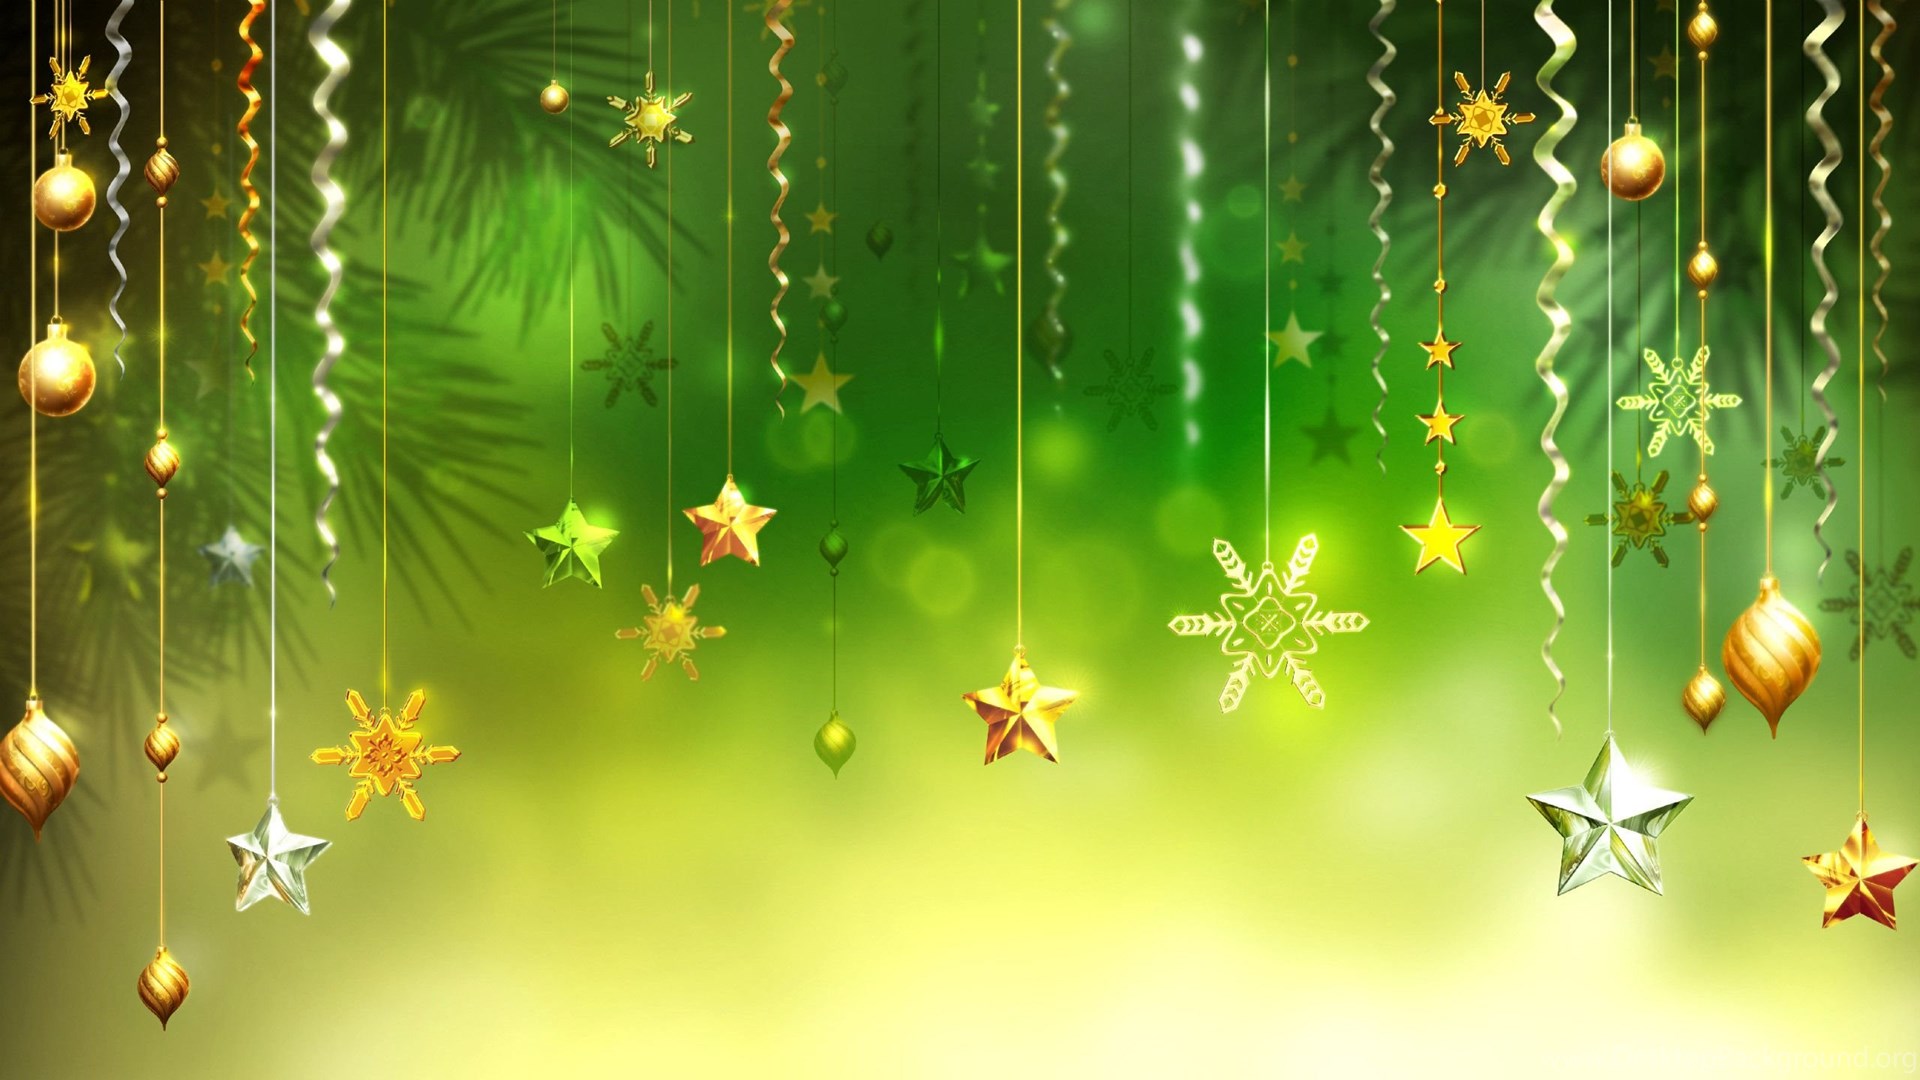 Nice And Beautiful Christmas Backgrounds Red, Green,Blue And Cute ... Desktop Backgrounds